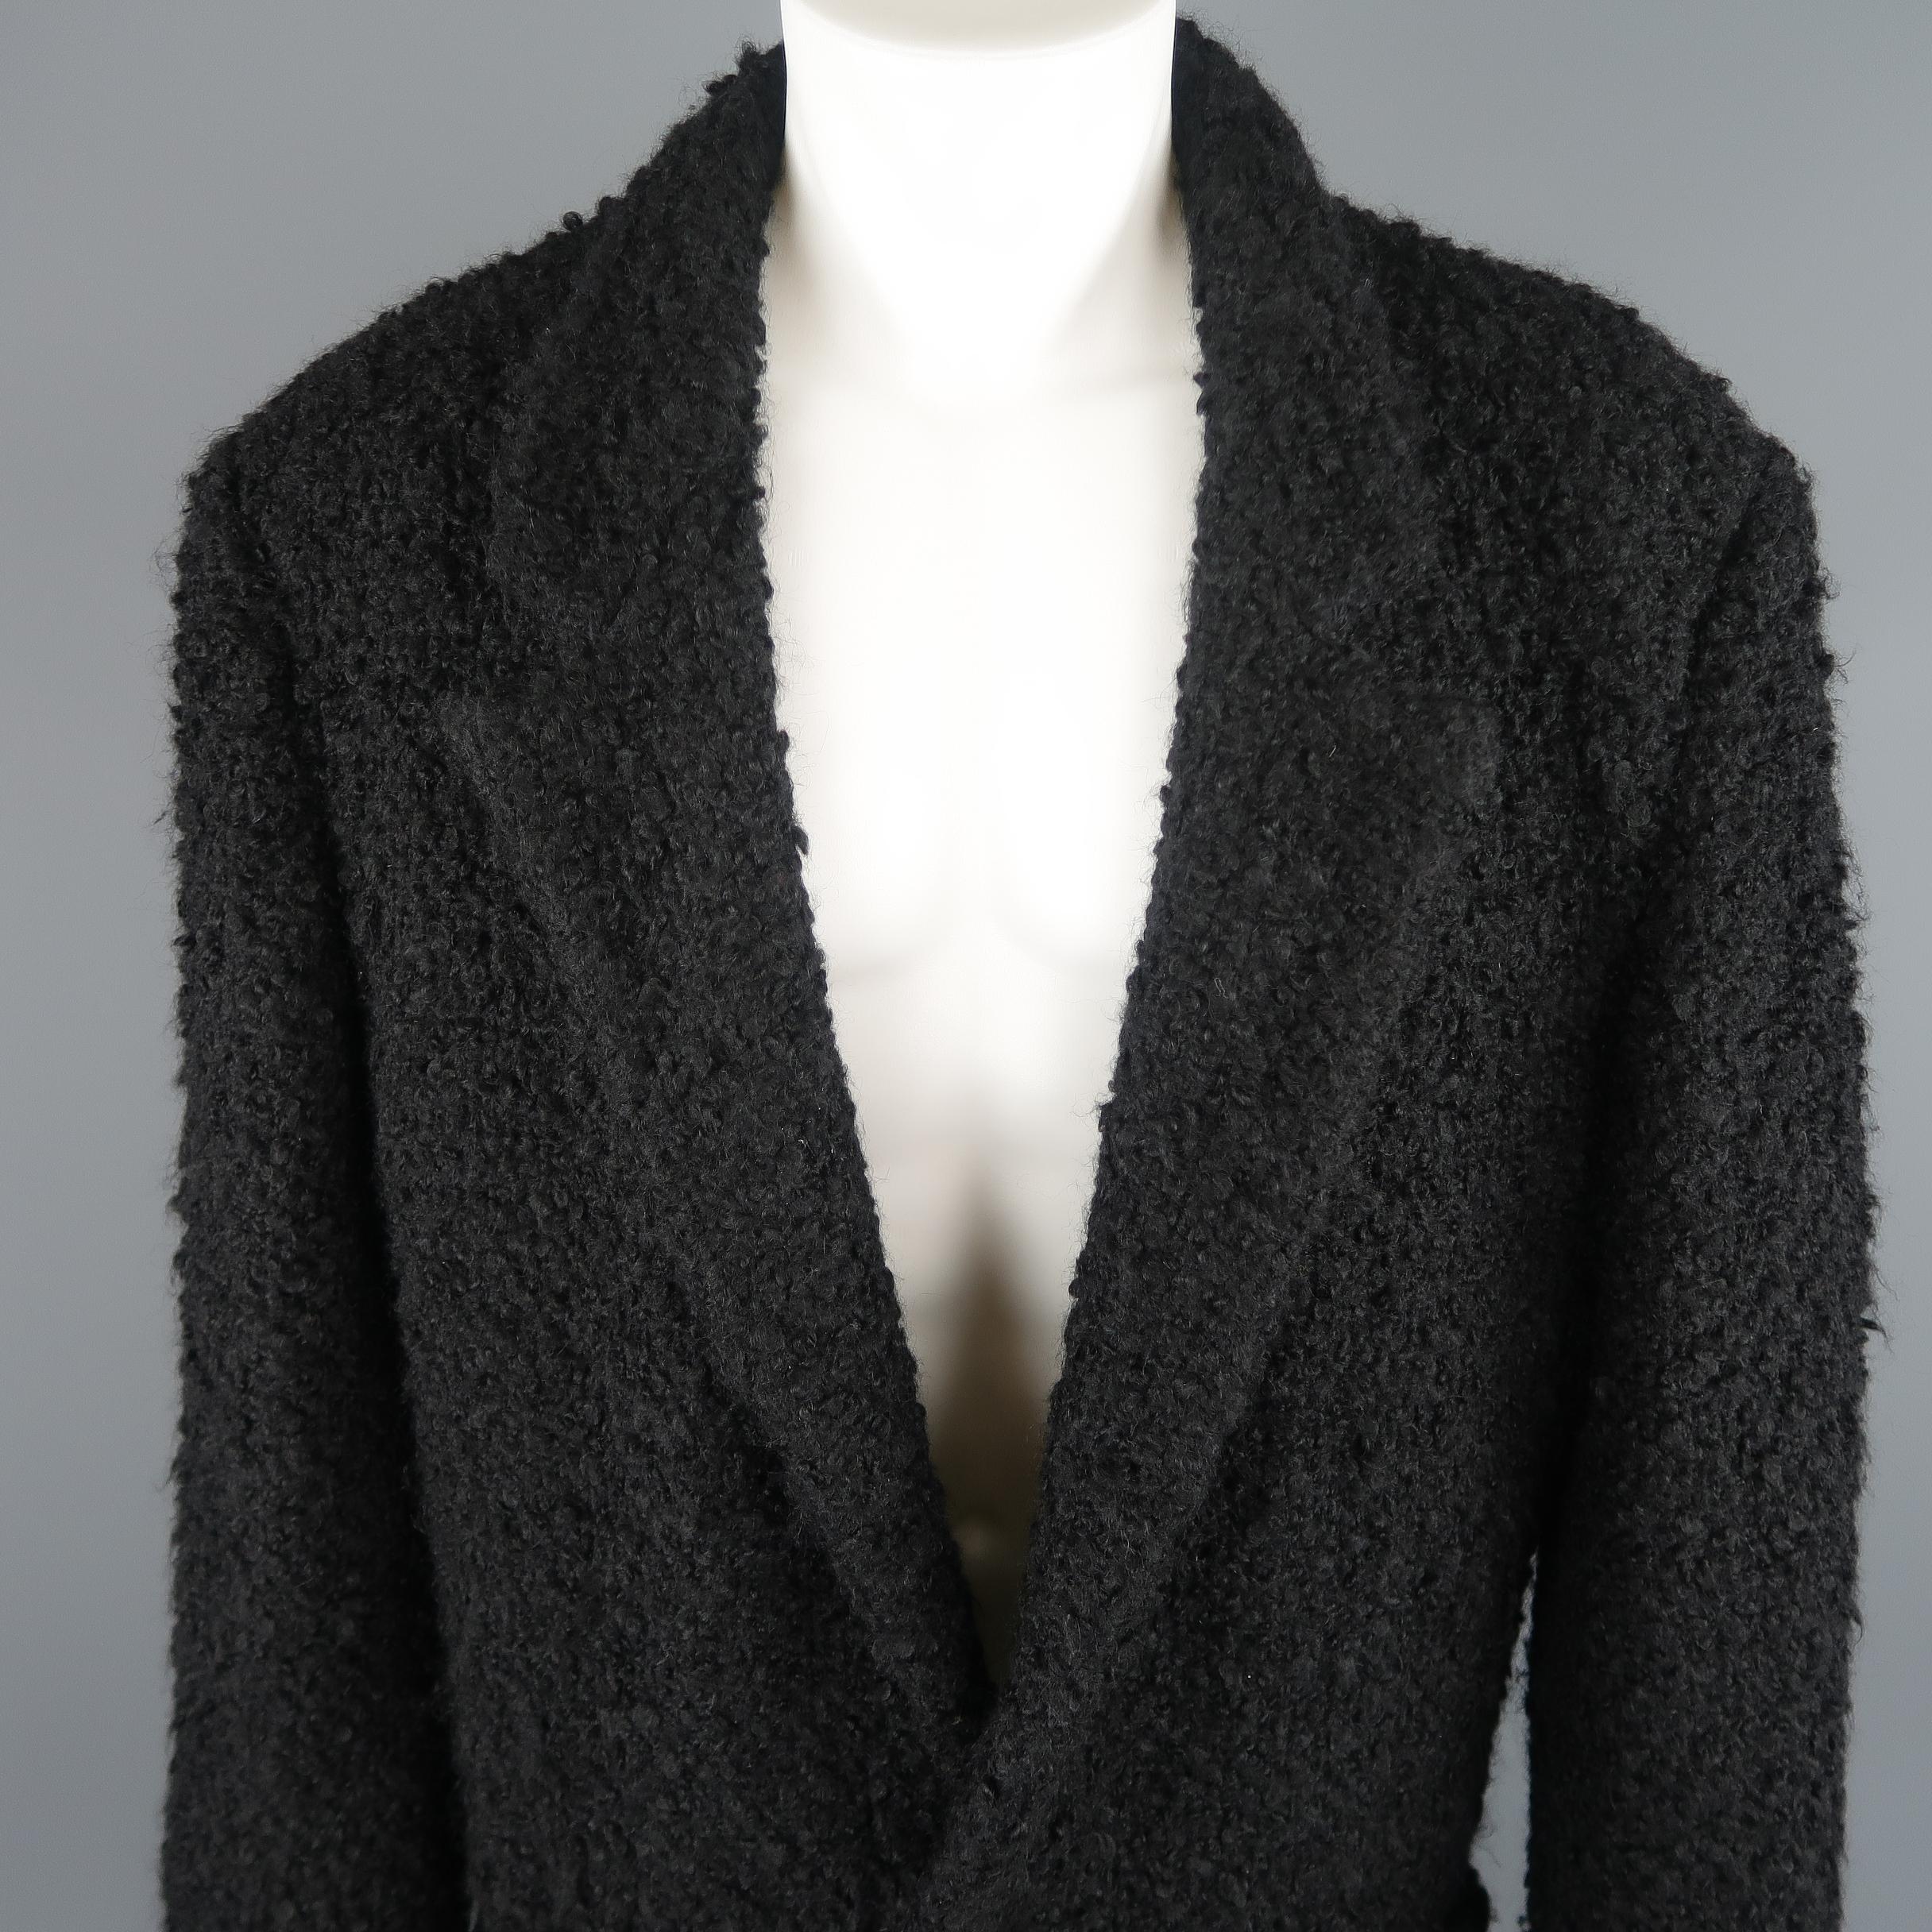 Vintage 1990's 38  Gianni Versace overcoat comes in a wool mohair fur textured fabric with singe leather covered button closure, quilted liner, and a notch lapel. Wear on buttons. As-is. Made in Italy.
 
Good Pre-Owned Condition.
Marked: IT 48
